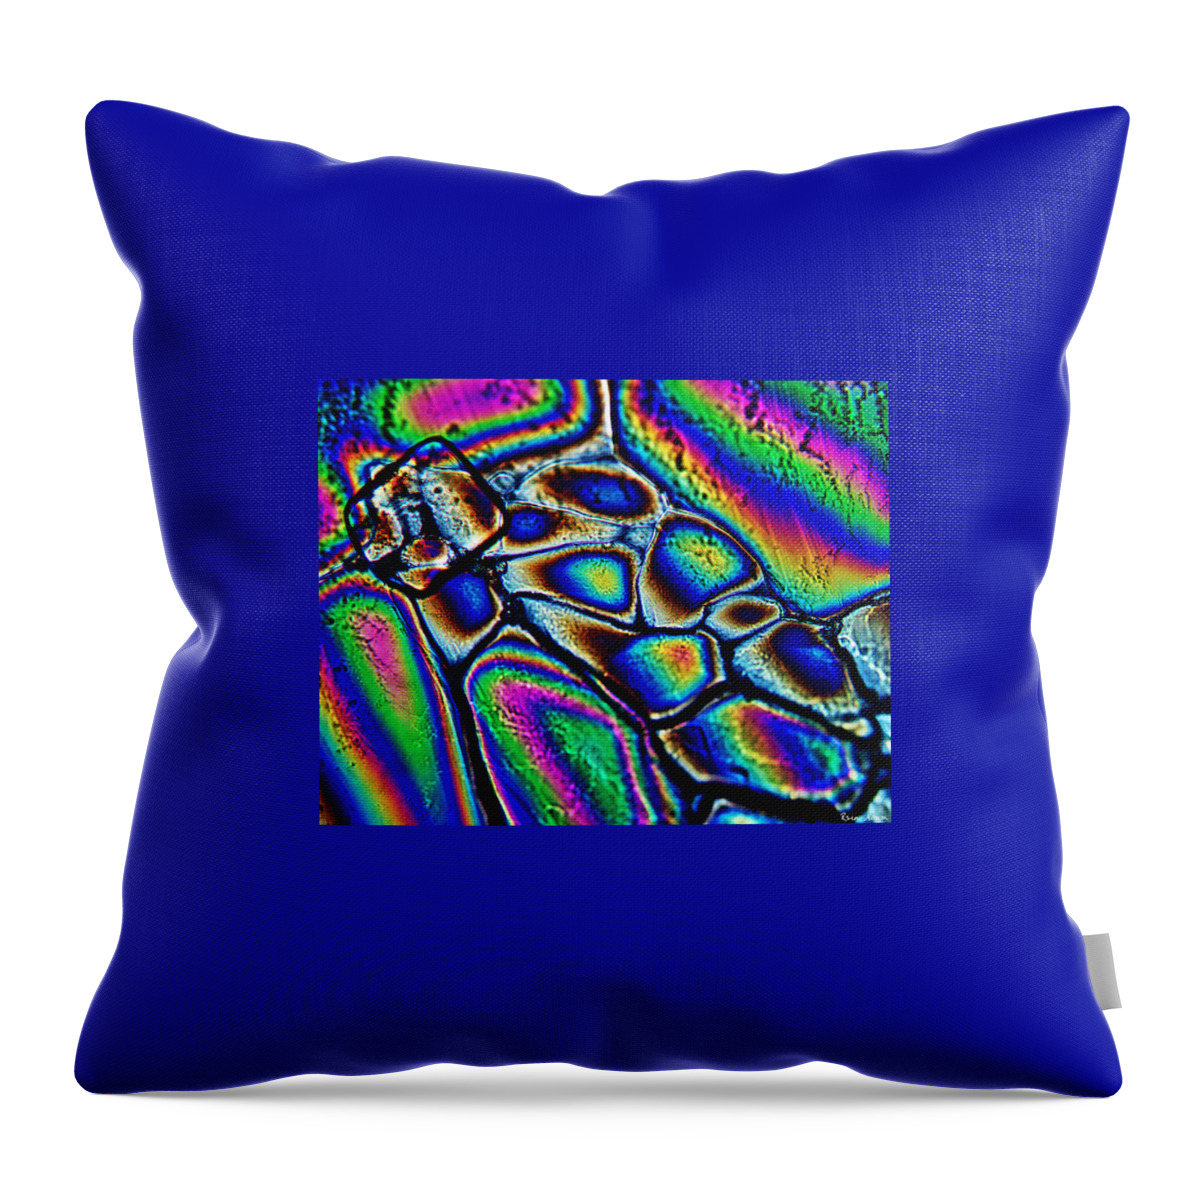  Throw Pillow featuring the photograph Chromatic Insight by Rein Nomm